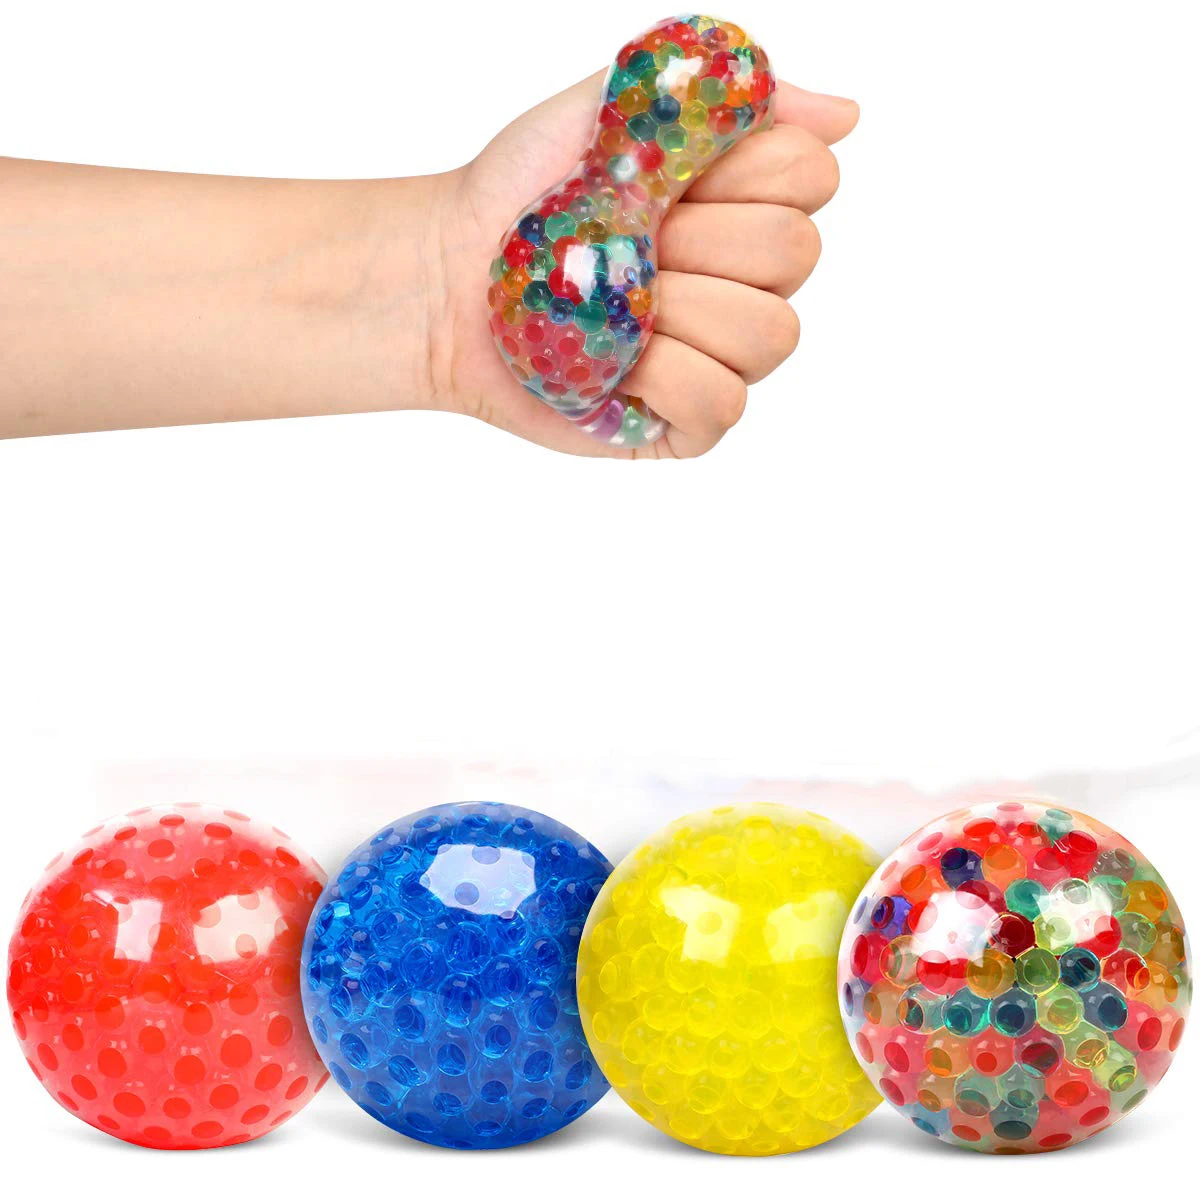 Stress Relief Squeezing Balls for Kids and Adults Premium Anti-Stress Squishy Balls with Water Beads Alleviate Tension Toys